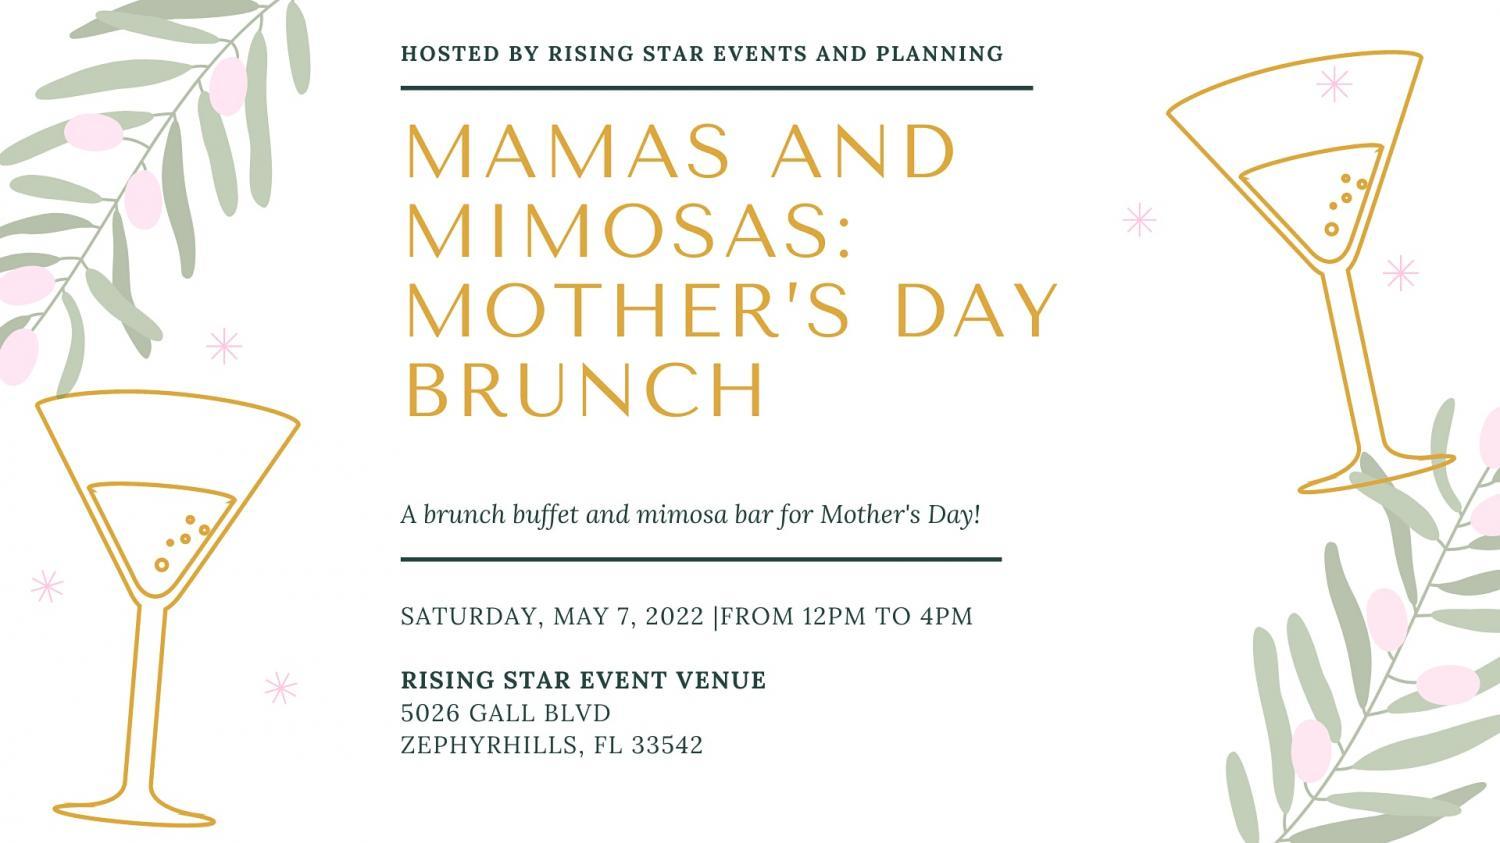 Mamas and Mimosas: Mother's Day Brunch Hosted by Rising Star Events